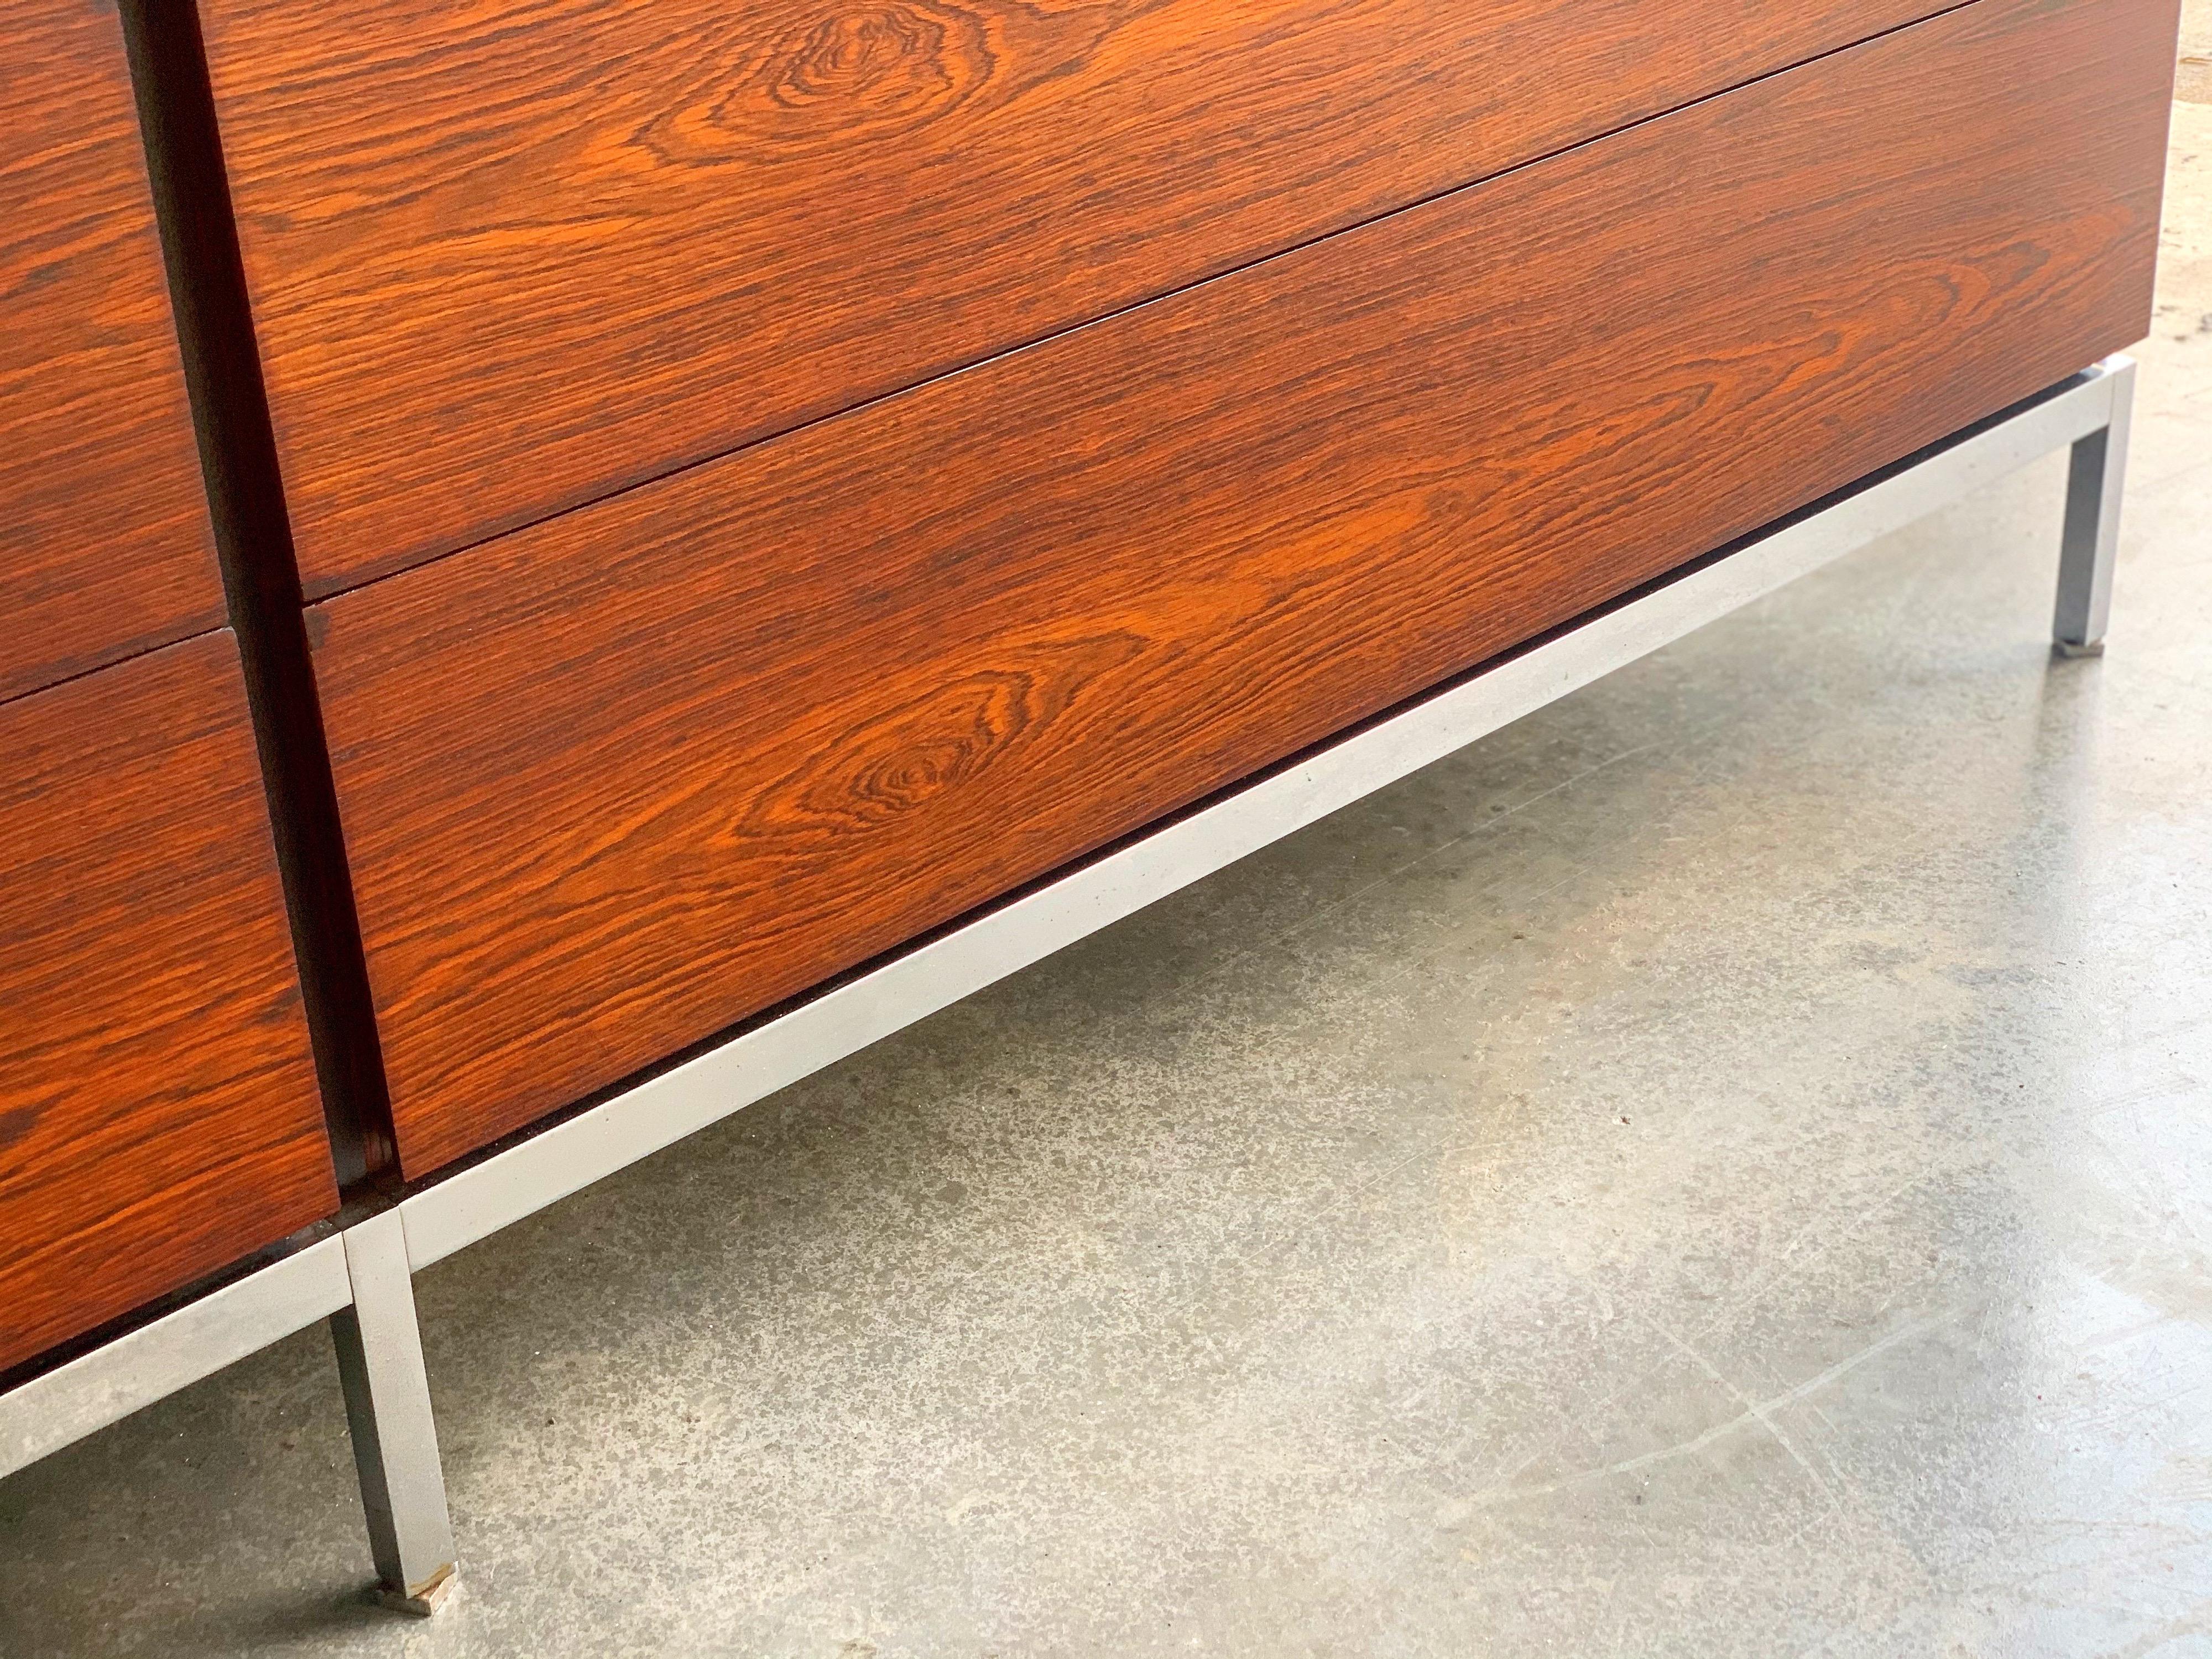 North American Mid-Century Modern Florence Knoll Dresser in Rosewood for Knoll Associates